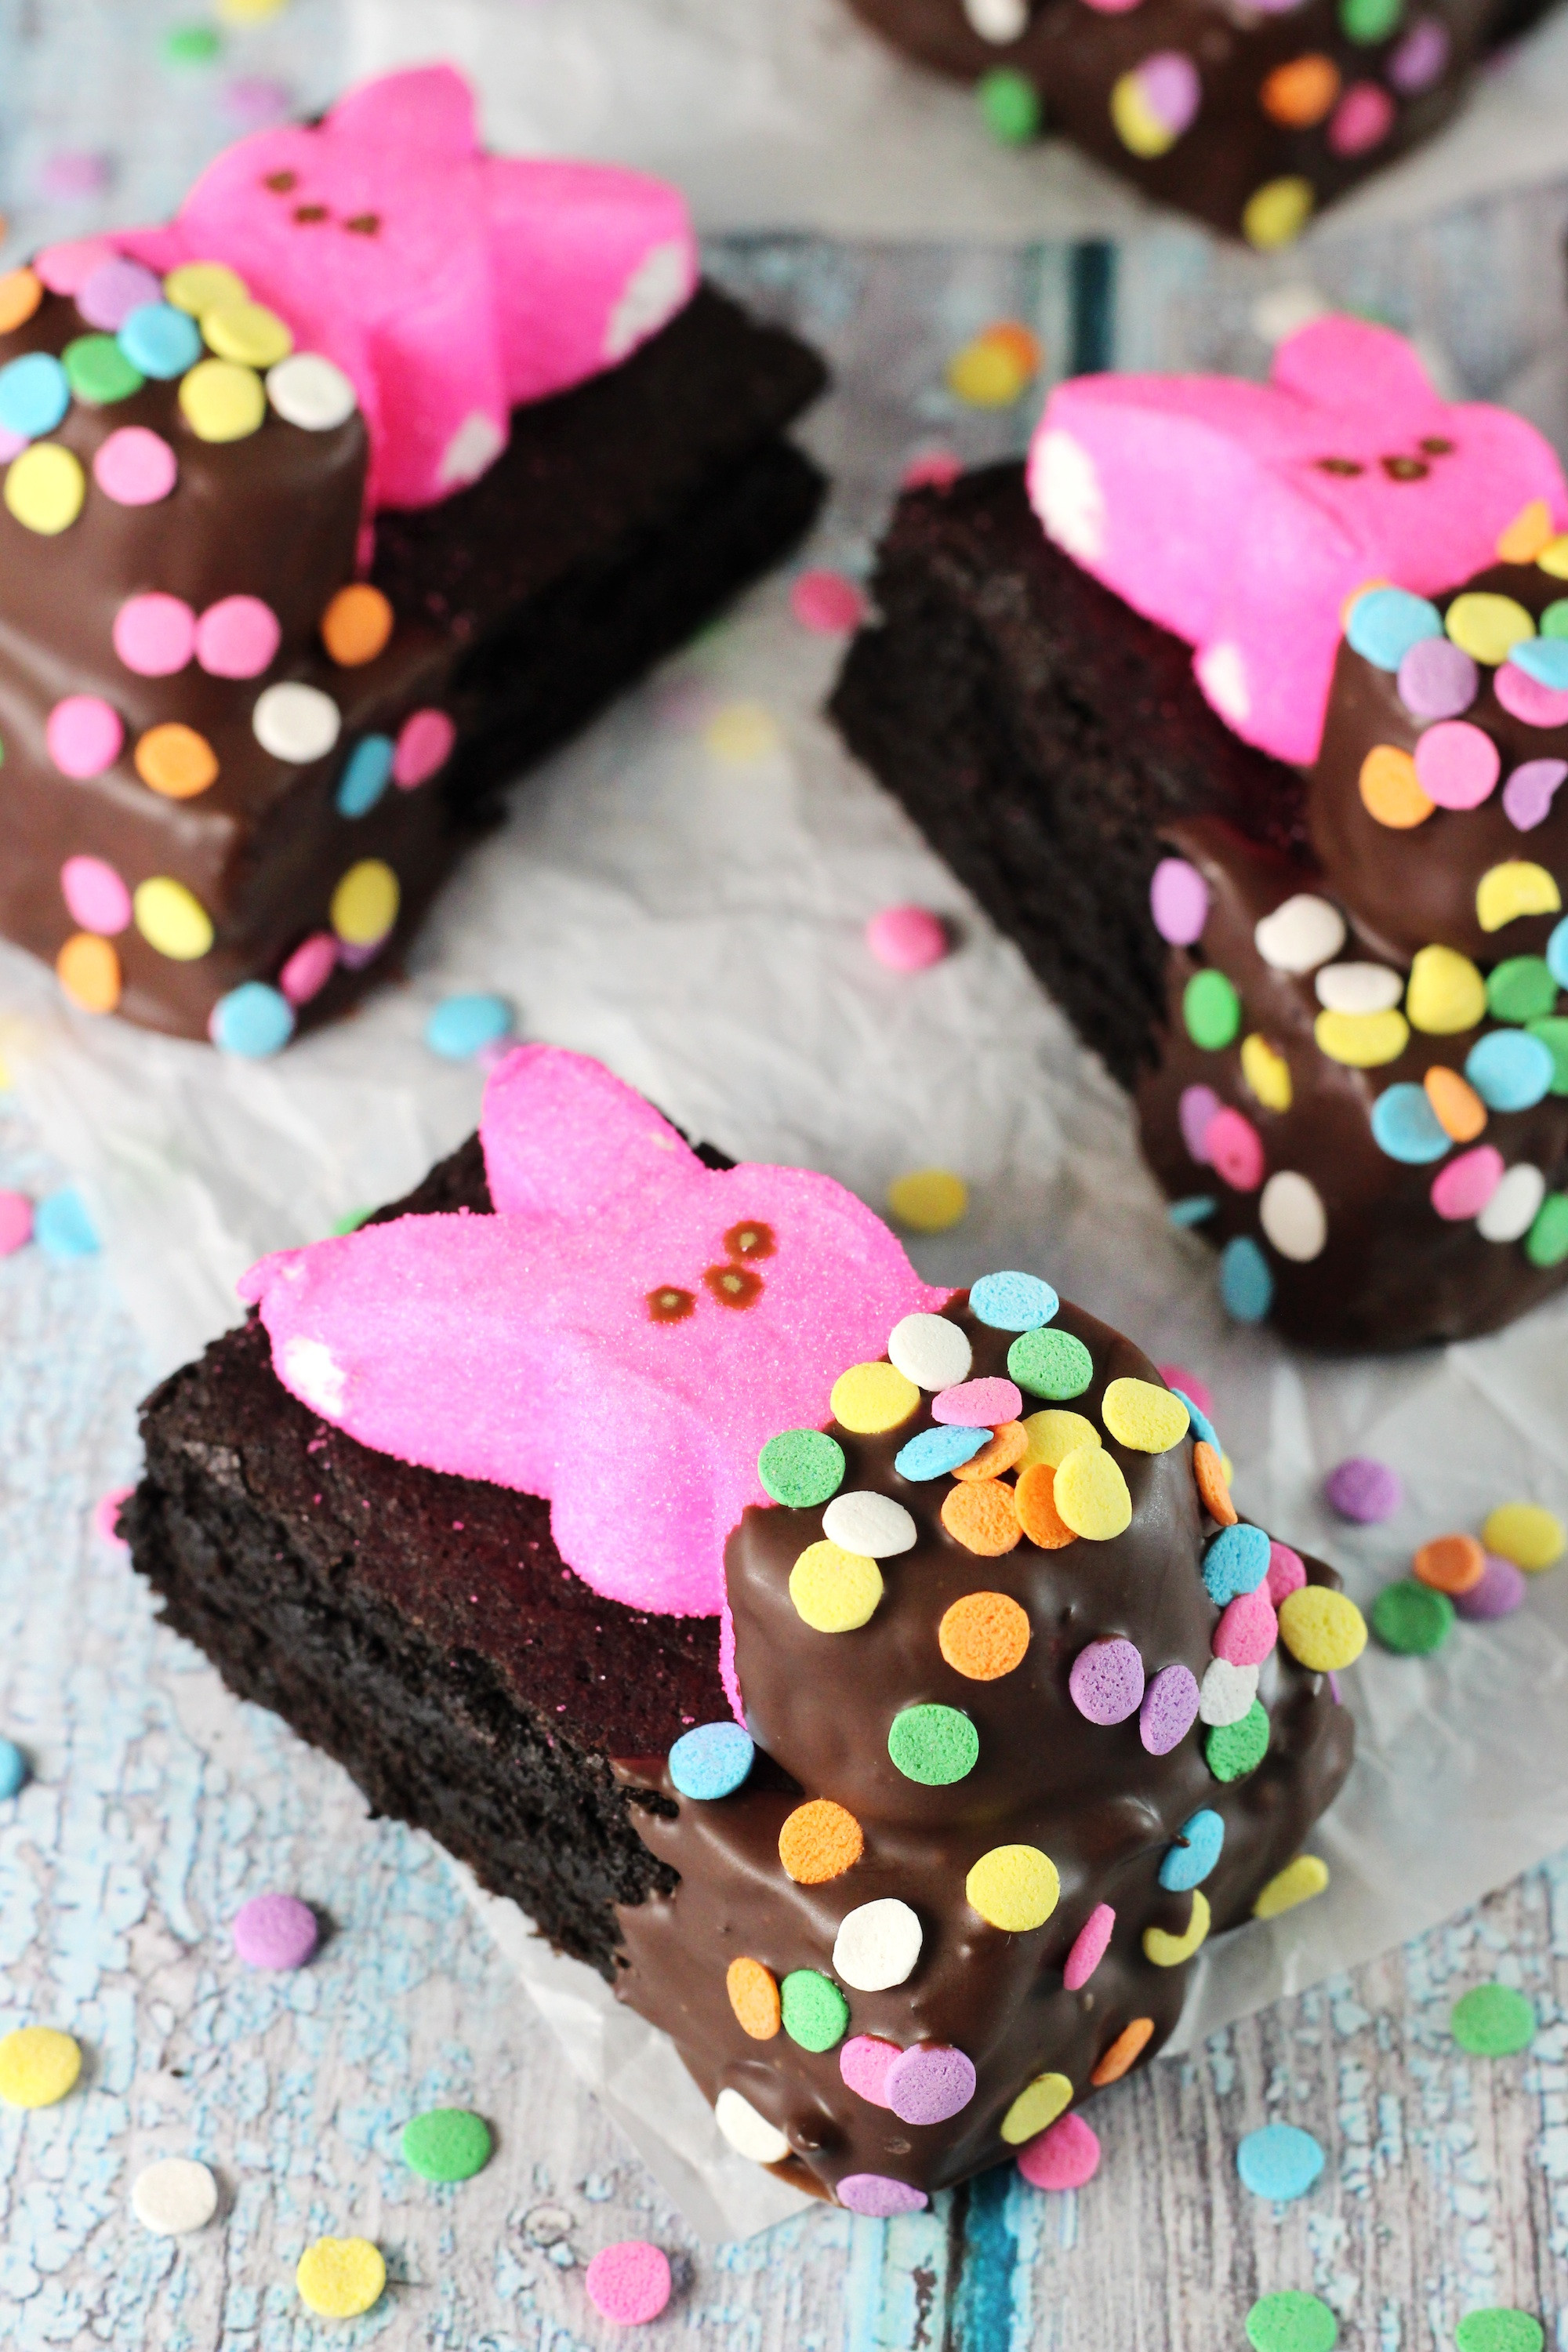 Easy Easter Dessert Recipies
 11 Easy Easter Desserts That Are Almost Too Adorable To